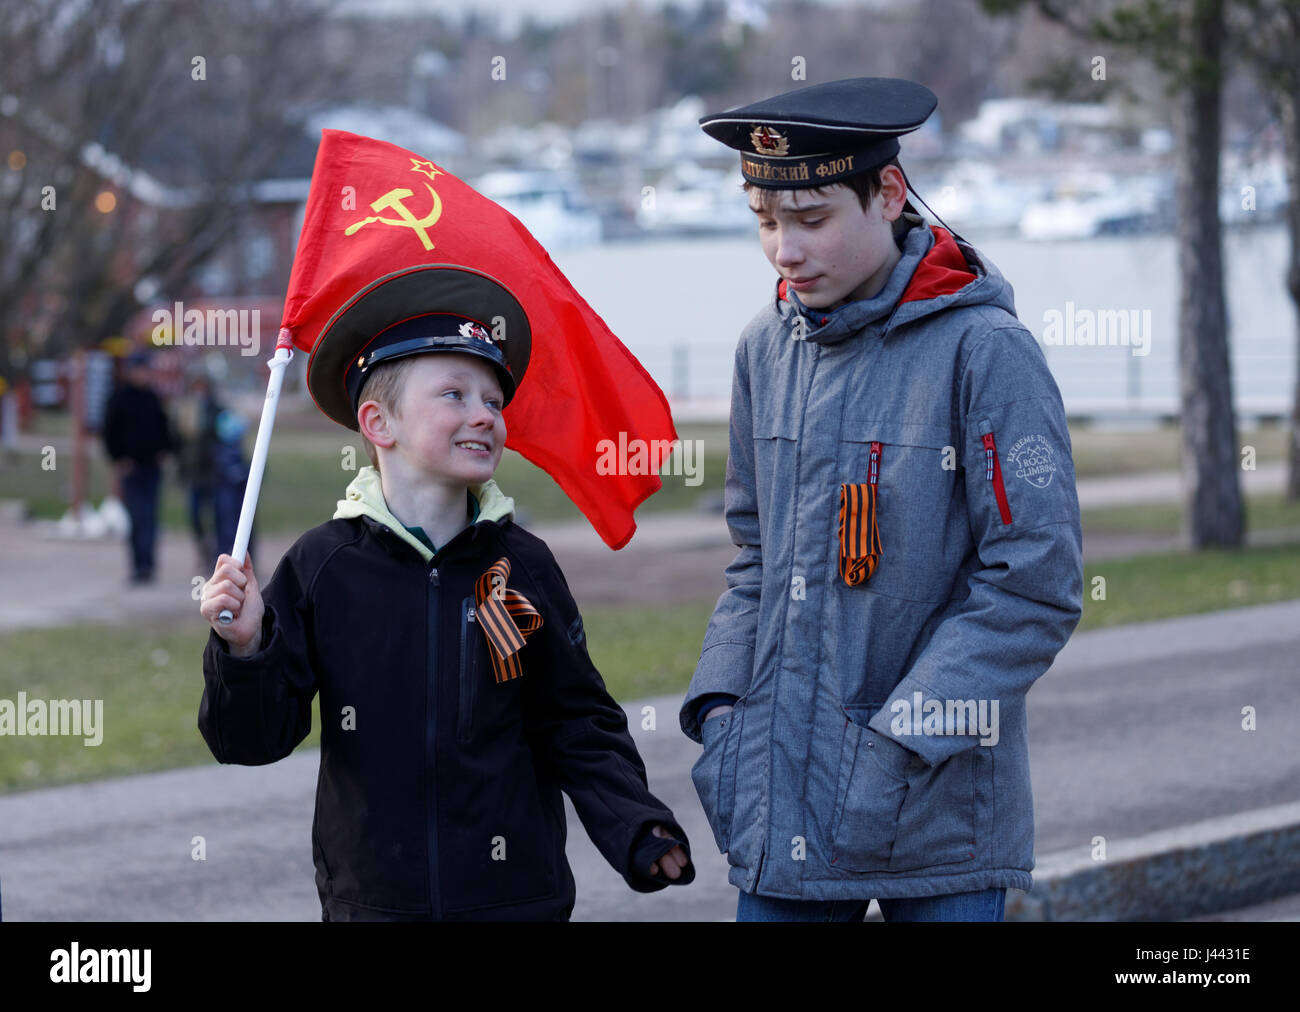 Helsinki, Finland. 9th May, 2017.Two boys wearing Soviet style uniform caps and carrying Soviet flag celebrating the anniversary of German surrender in Berlin of 9 May 1945 in a procession seeking publicity to a new Russian organization in Finland. Credit: Hannu Mononen/Alamy Live News Stock Photo